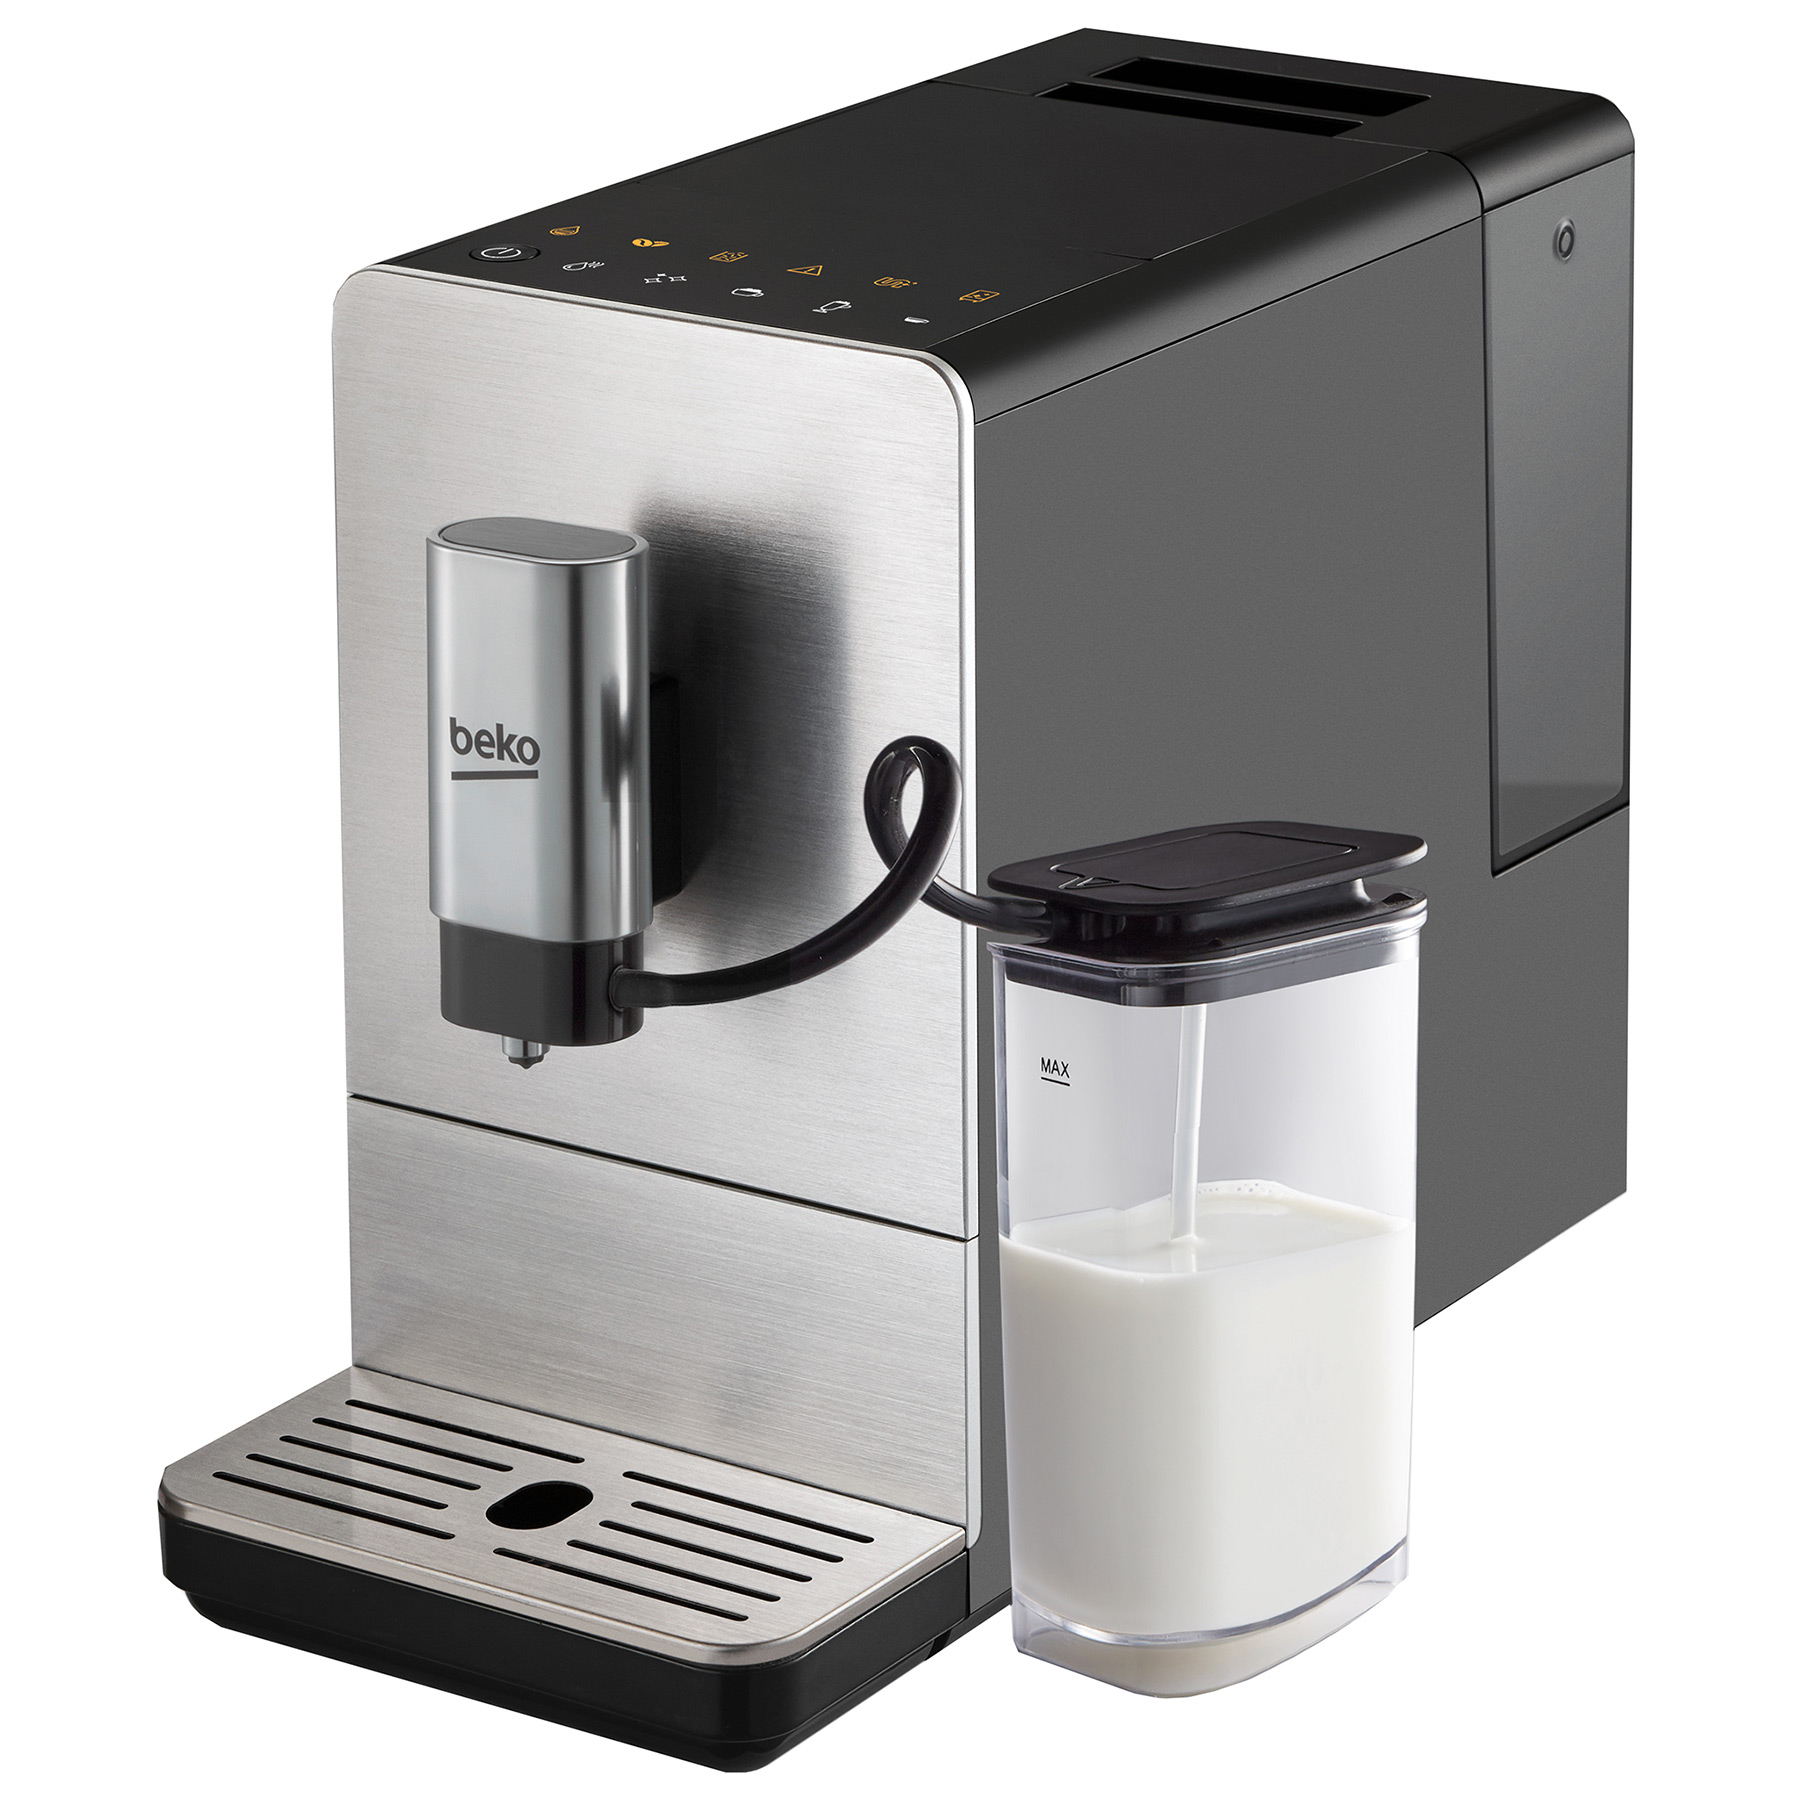 Image of Beko CEG5331X Bean to Cup Coffee Machine with Milk Frother